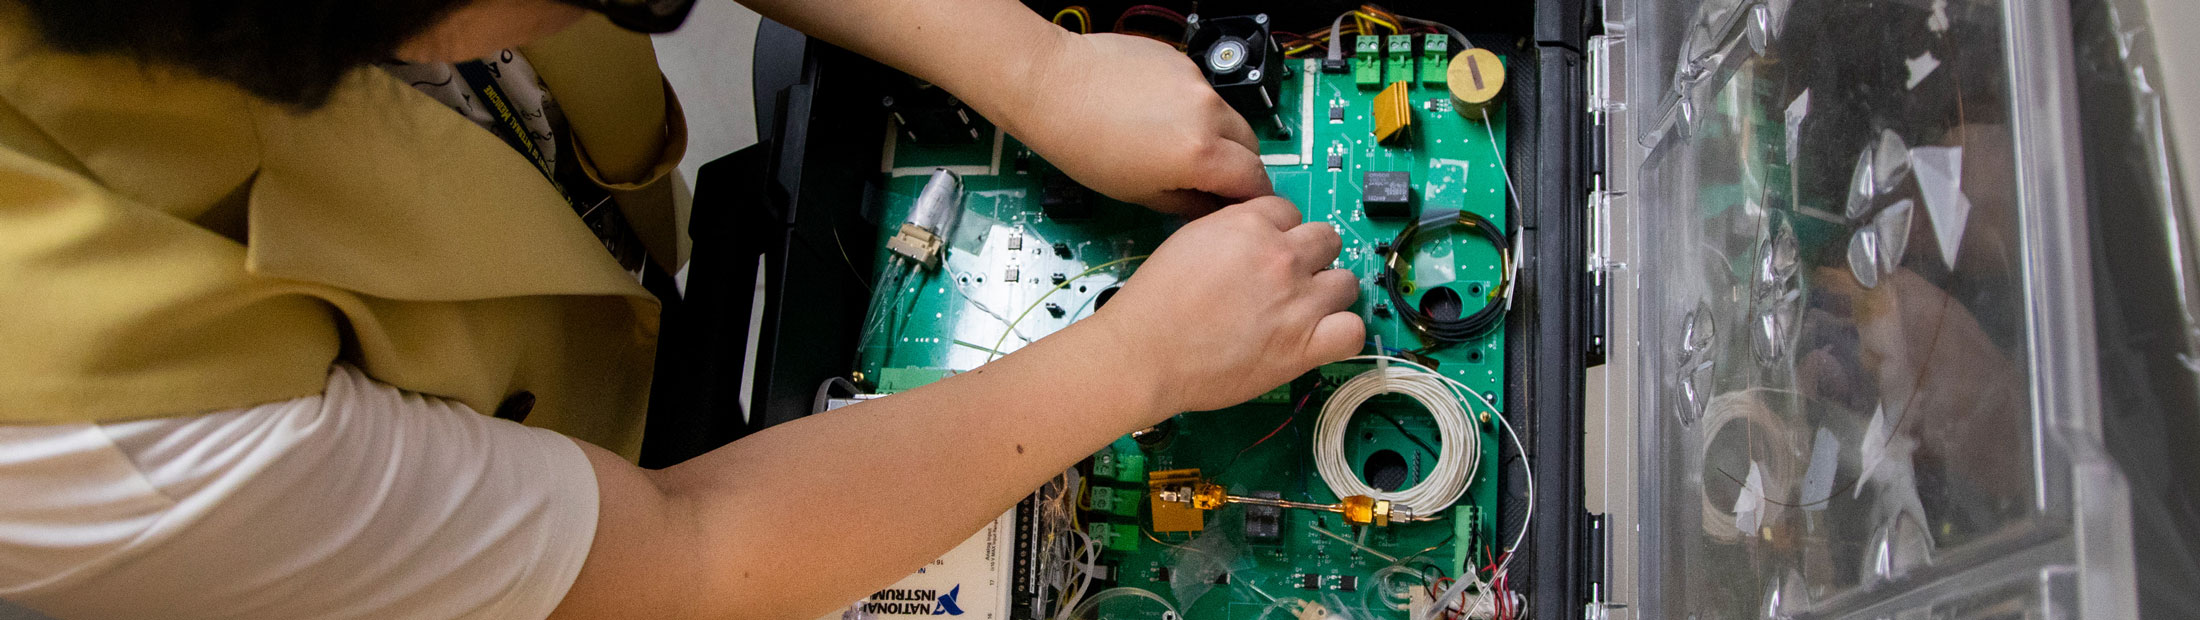 researcher works on the circuit board